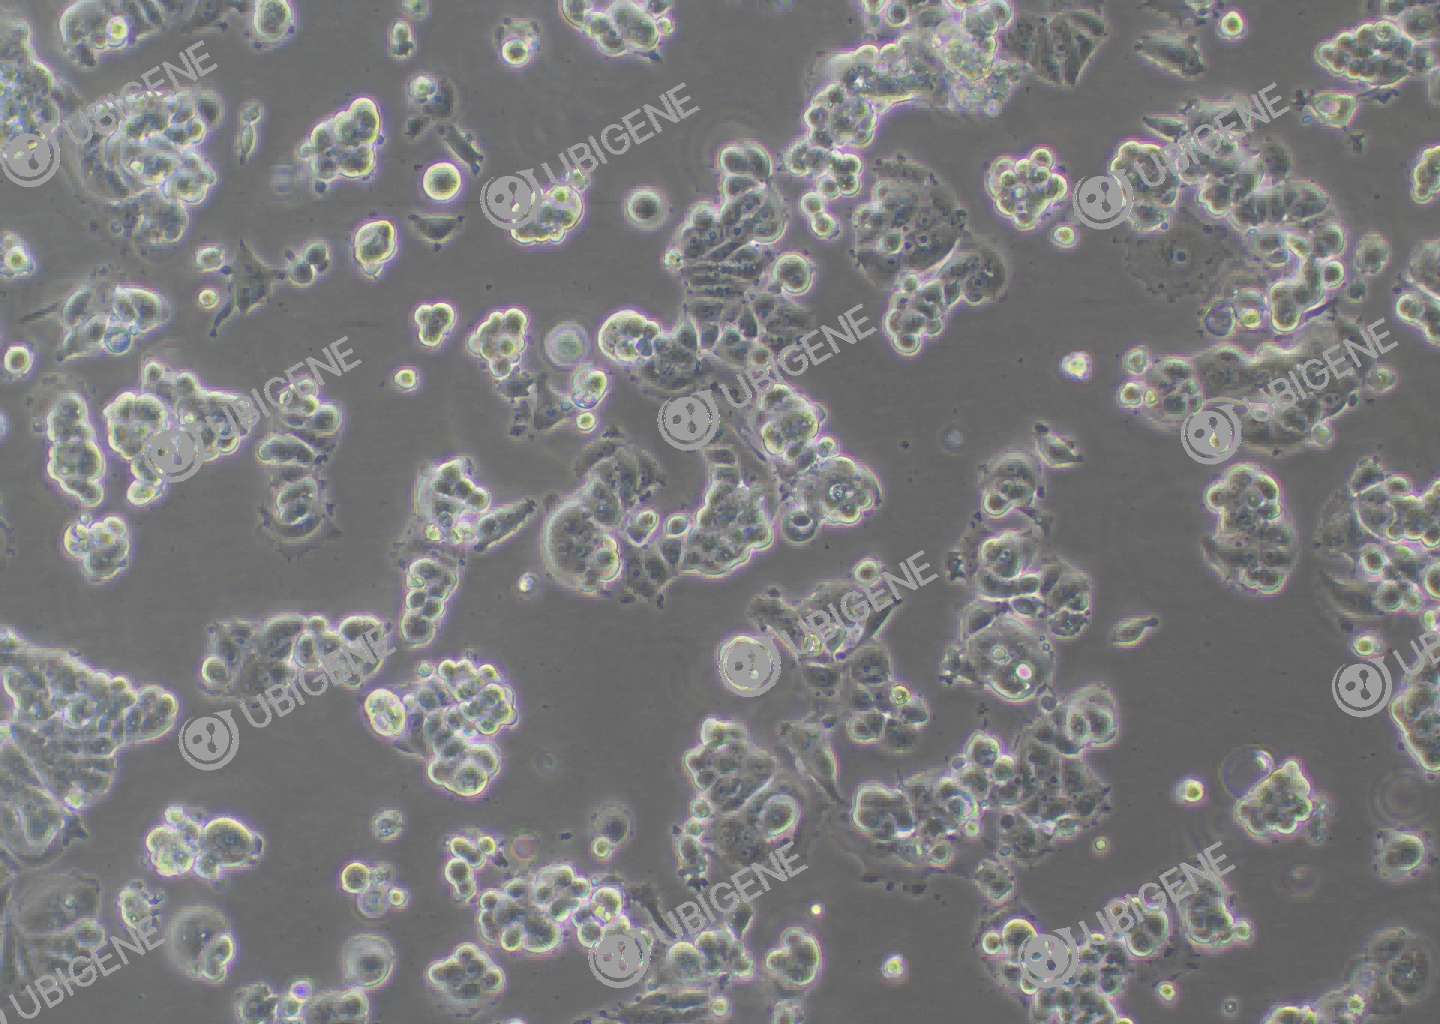 MCF7 cell line Cultured cell morphology